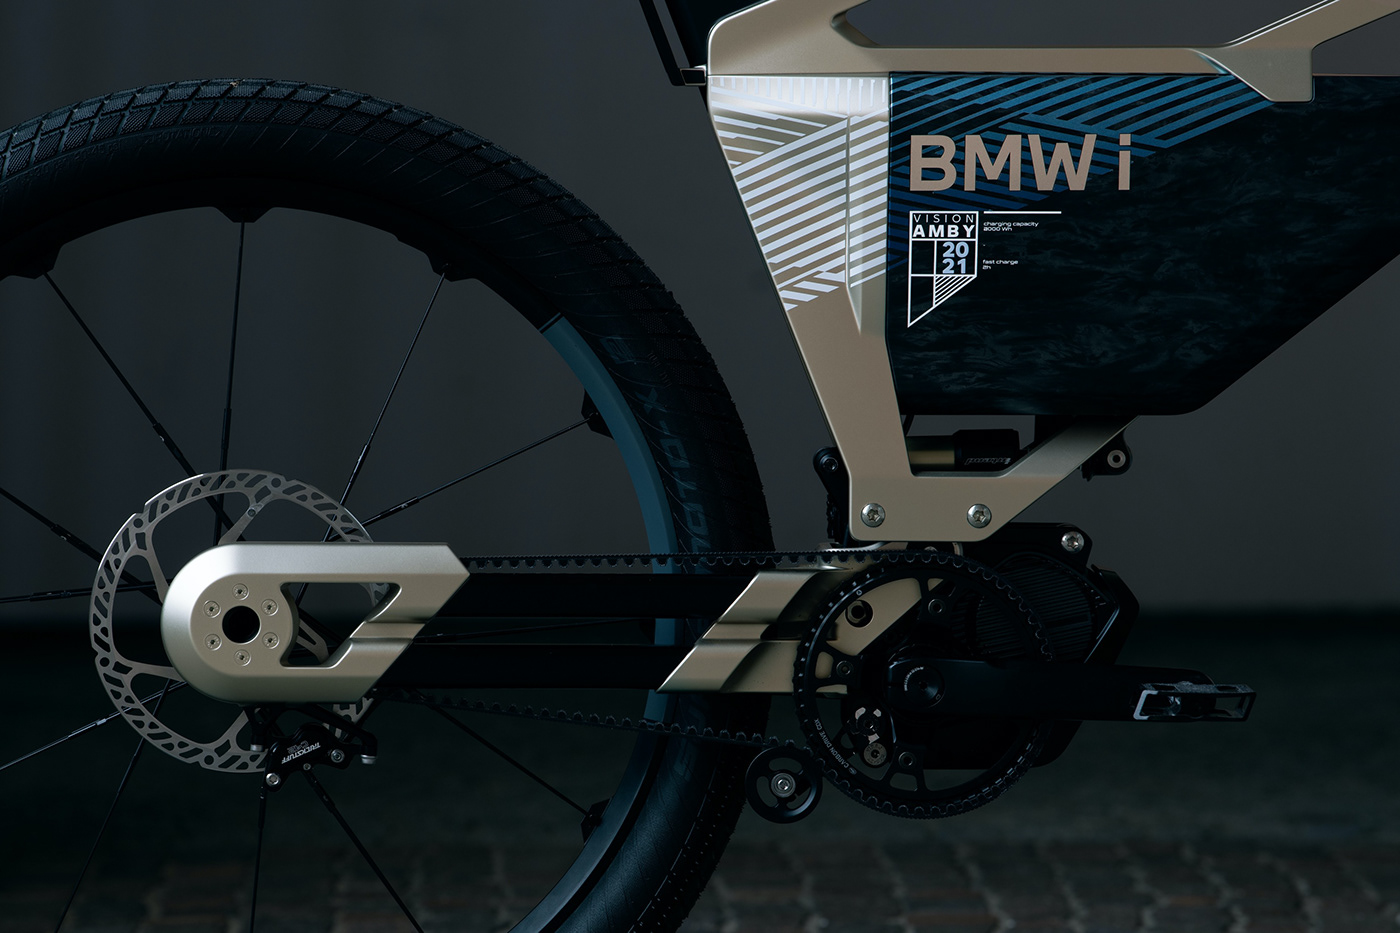 Bicycle BMW BMW i concept Ebike industrial design  mobility Sustainable transportation